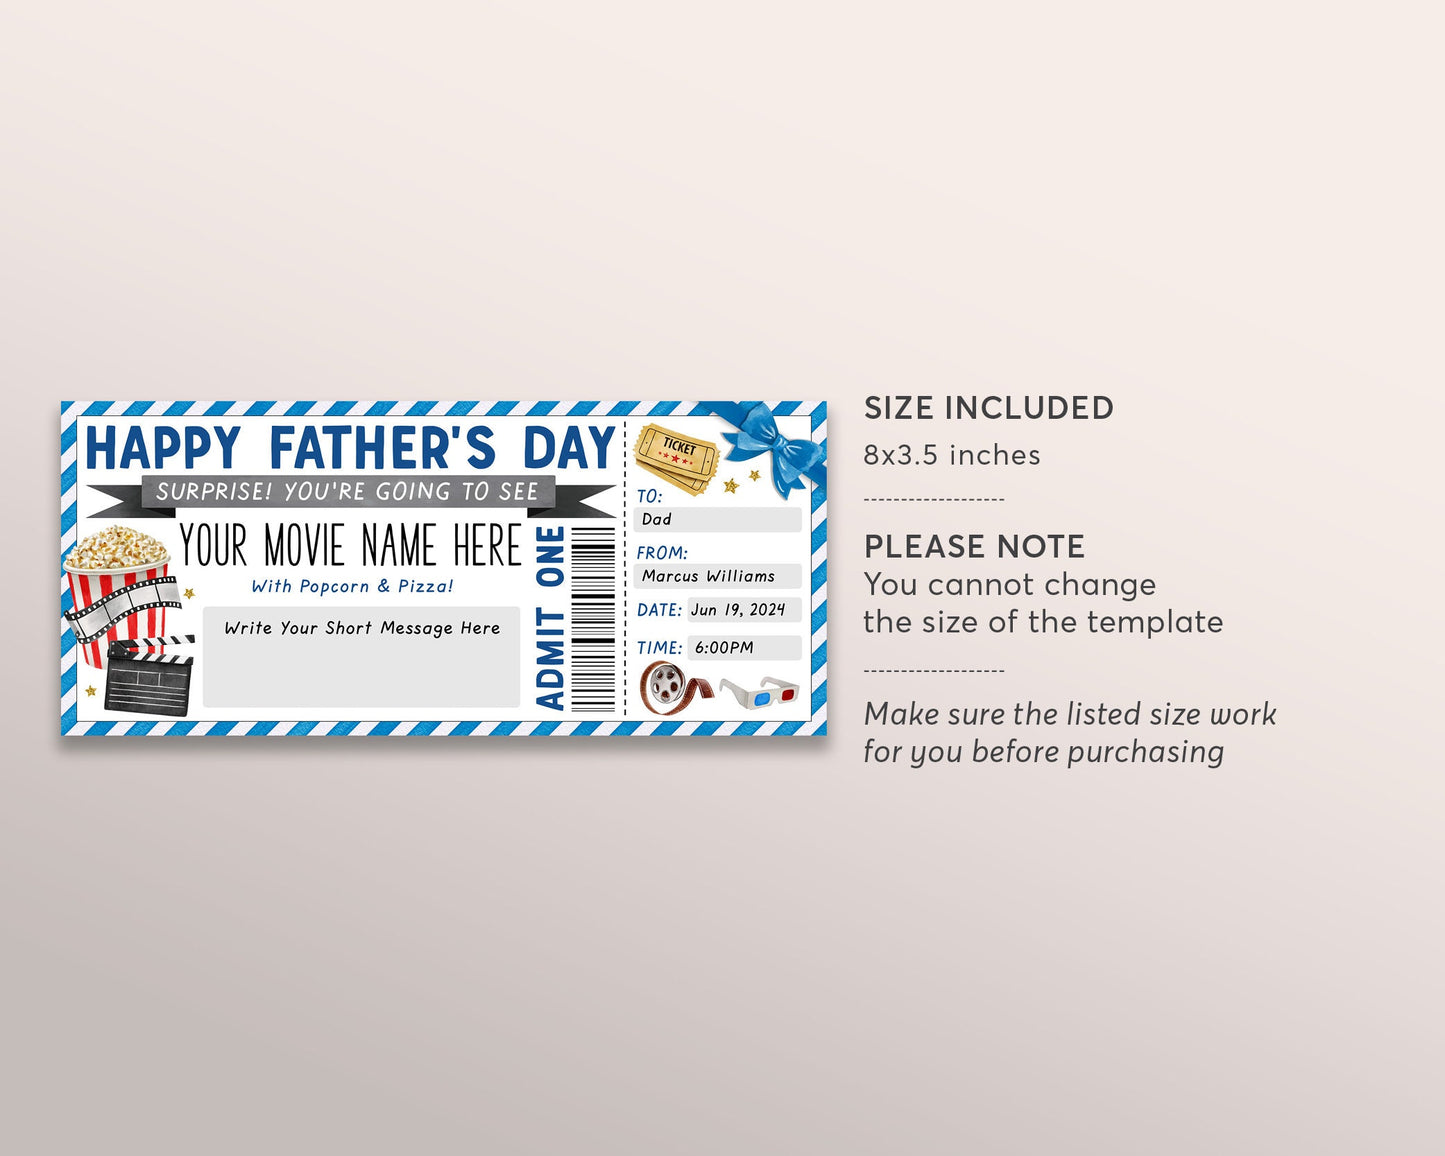 Fathers Day Movie Ticket Invitation Editable Template, Family Movie Night Gift Voucher Invite Reveal For Dad Cinema Theatre Coupon Printable